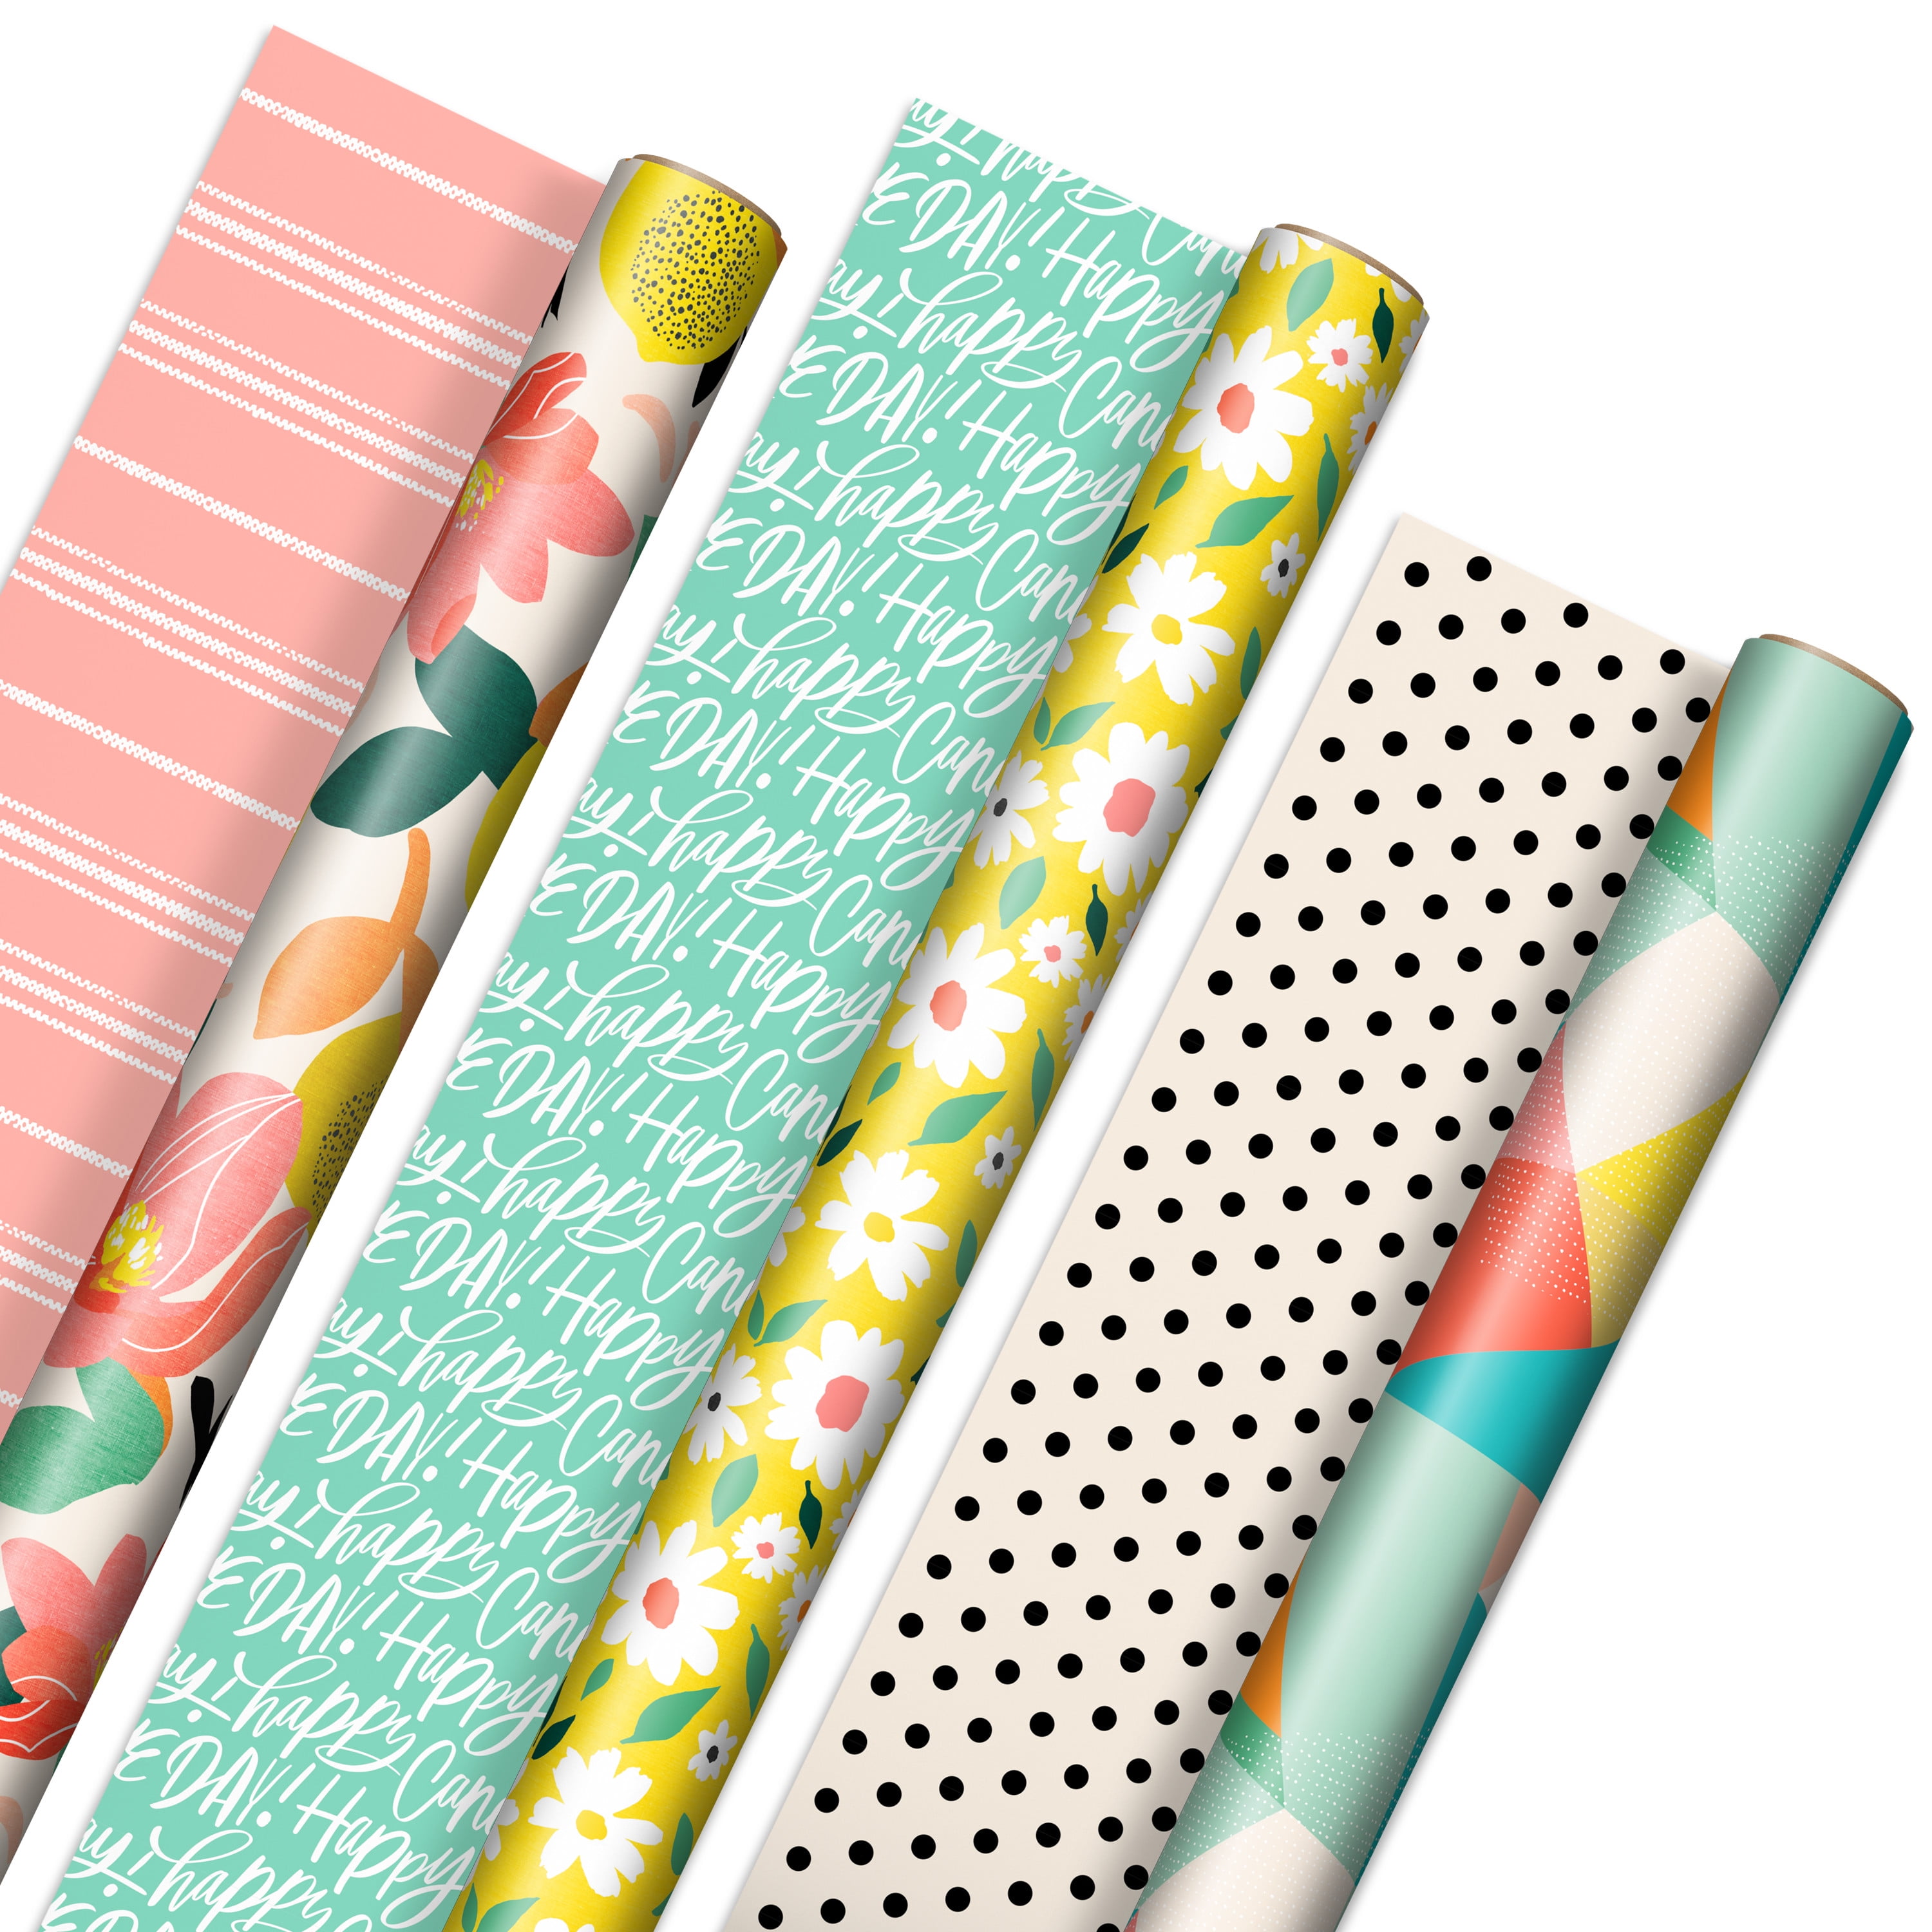 American Greetings Reversible Birthday Wrapping Paper, Floral, Cupcakes, and Polka Dots (4 Rolls, 120 Sq. ft)